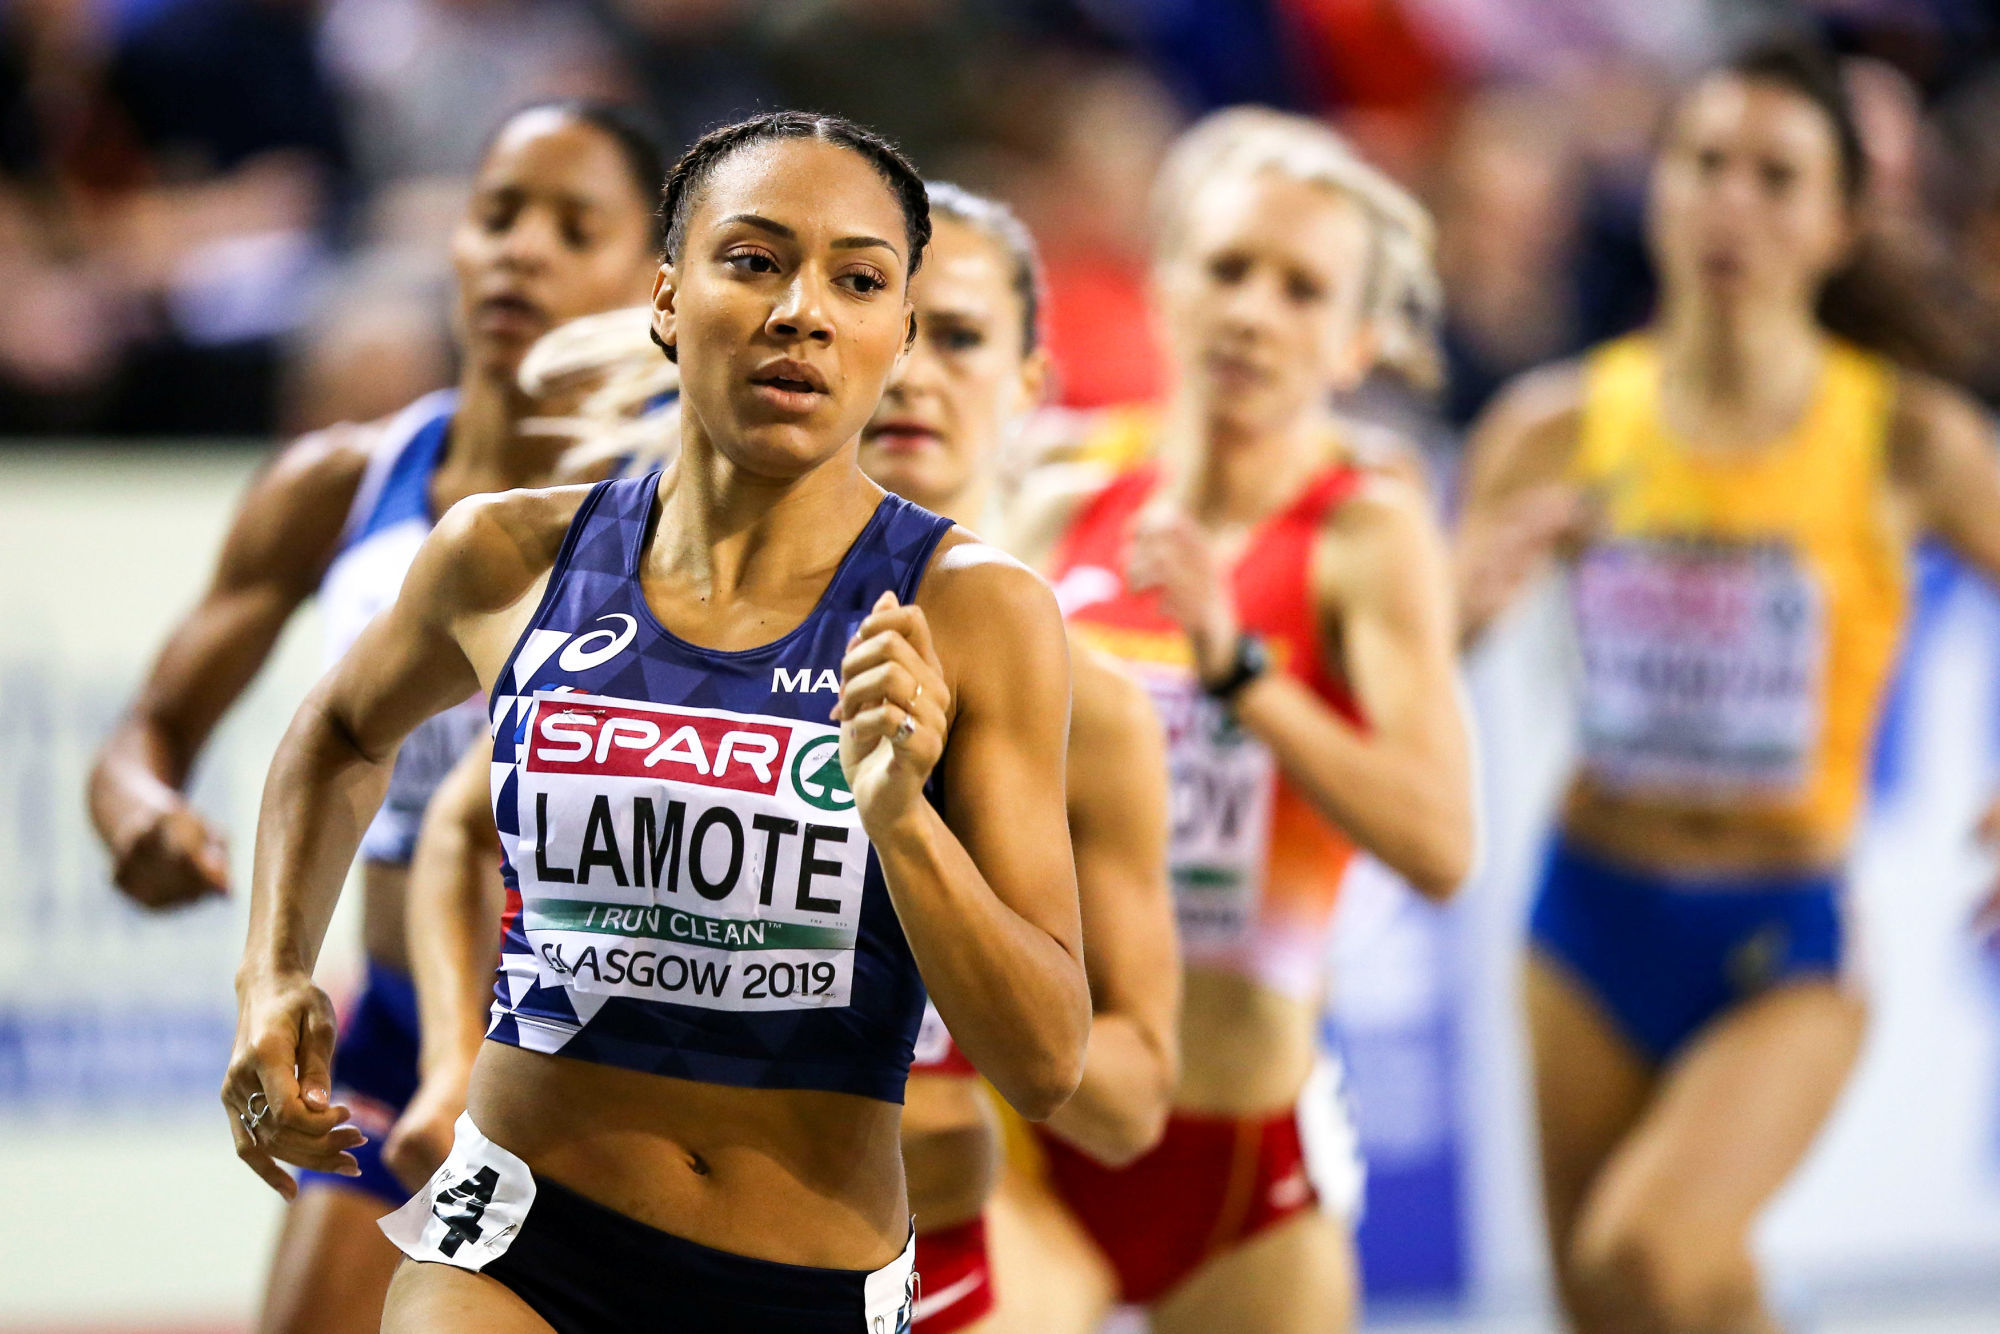 Renelle Lamote during day three of the European Indoor Athletics Championships at the Emirates Arena, Glasgow on 3rd March 2019
Photo : Newspix / Icon Sport